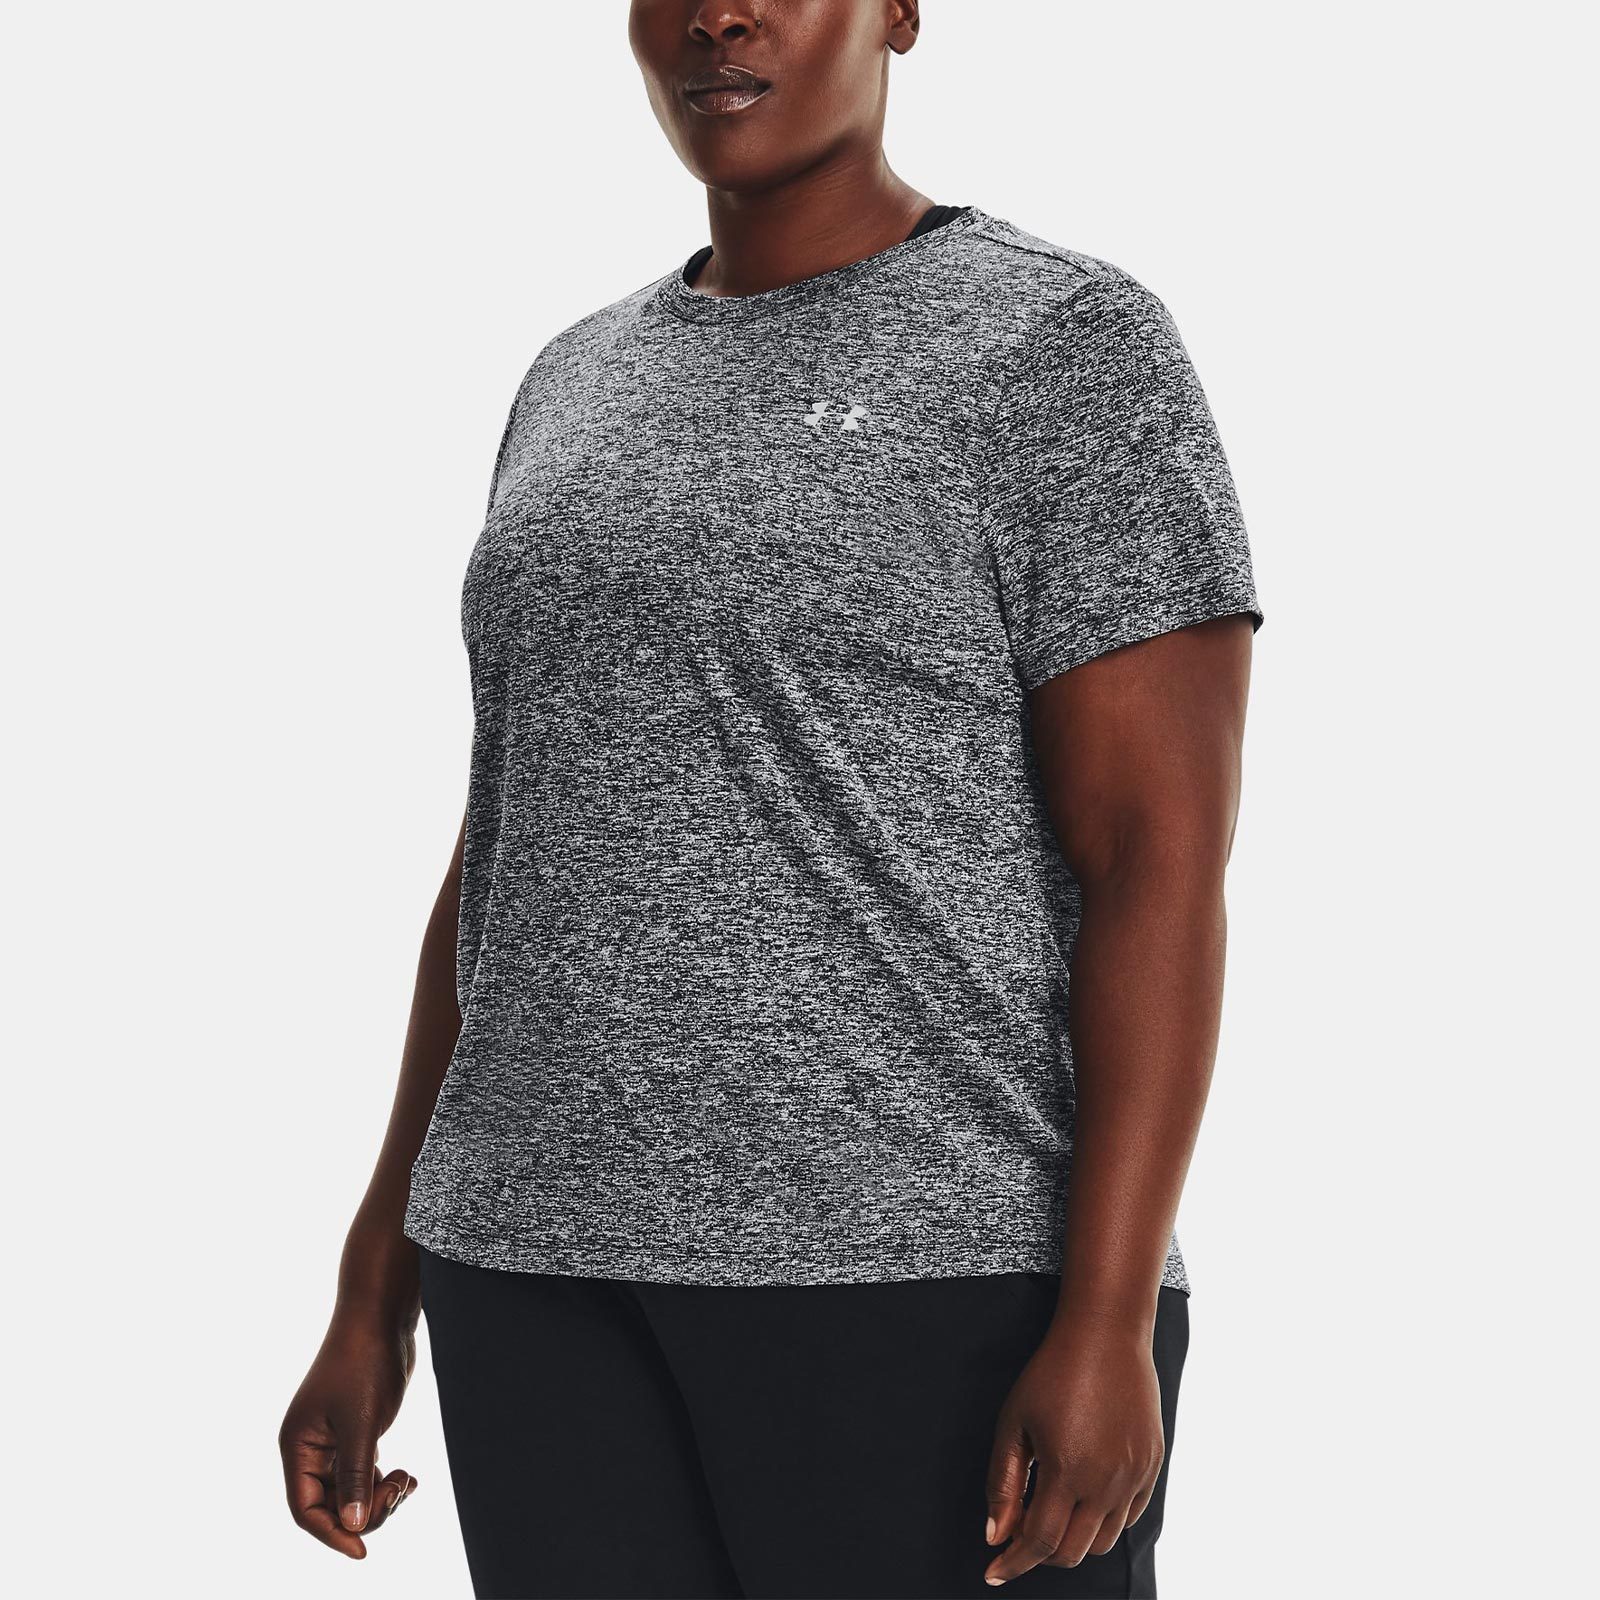 8 Plus Size Brands Upgrading Your Gymflow for 2017  Plus size activewear,  Plus size, Plus size outfits